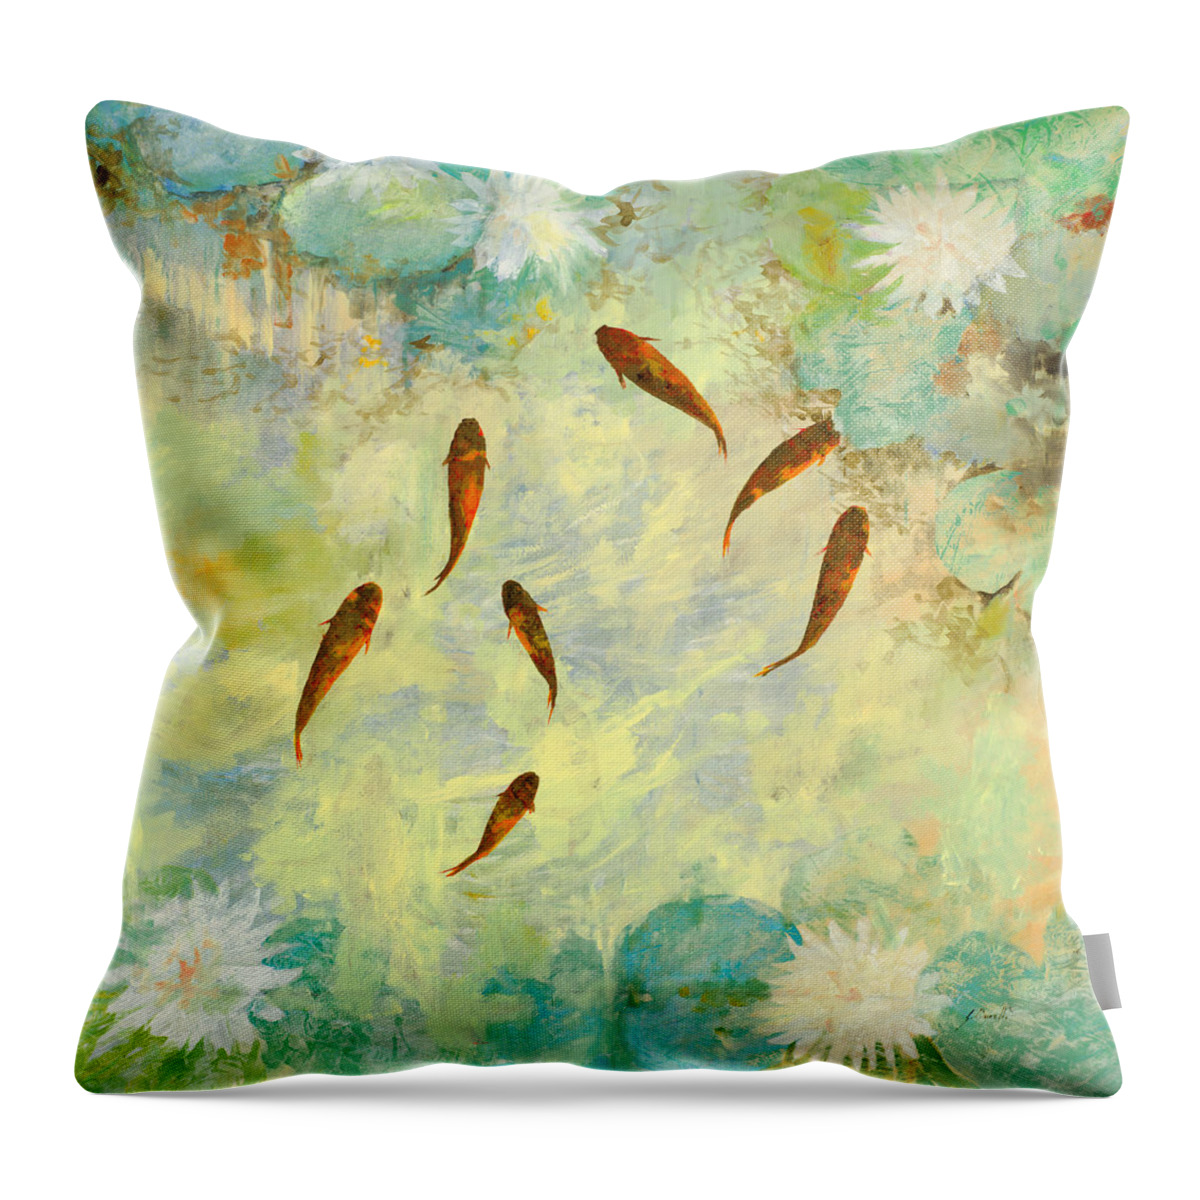 Koi Throw Pillow featuring the painting Sette Pesci Rossi Tra Le Ninfee by Guido Borelli